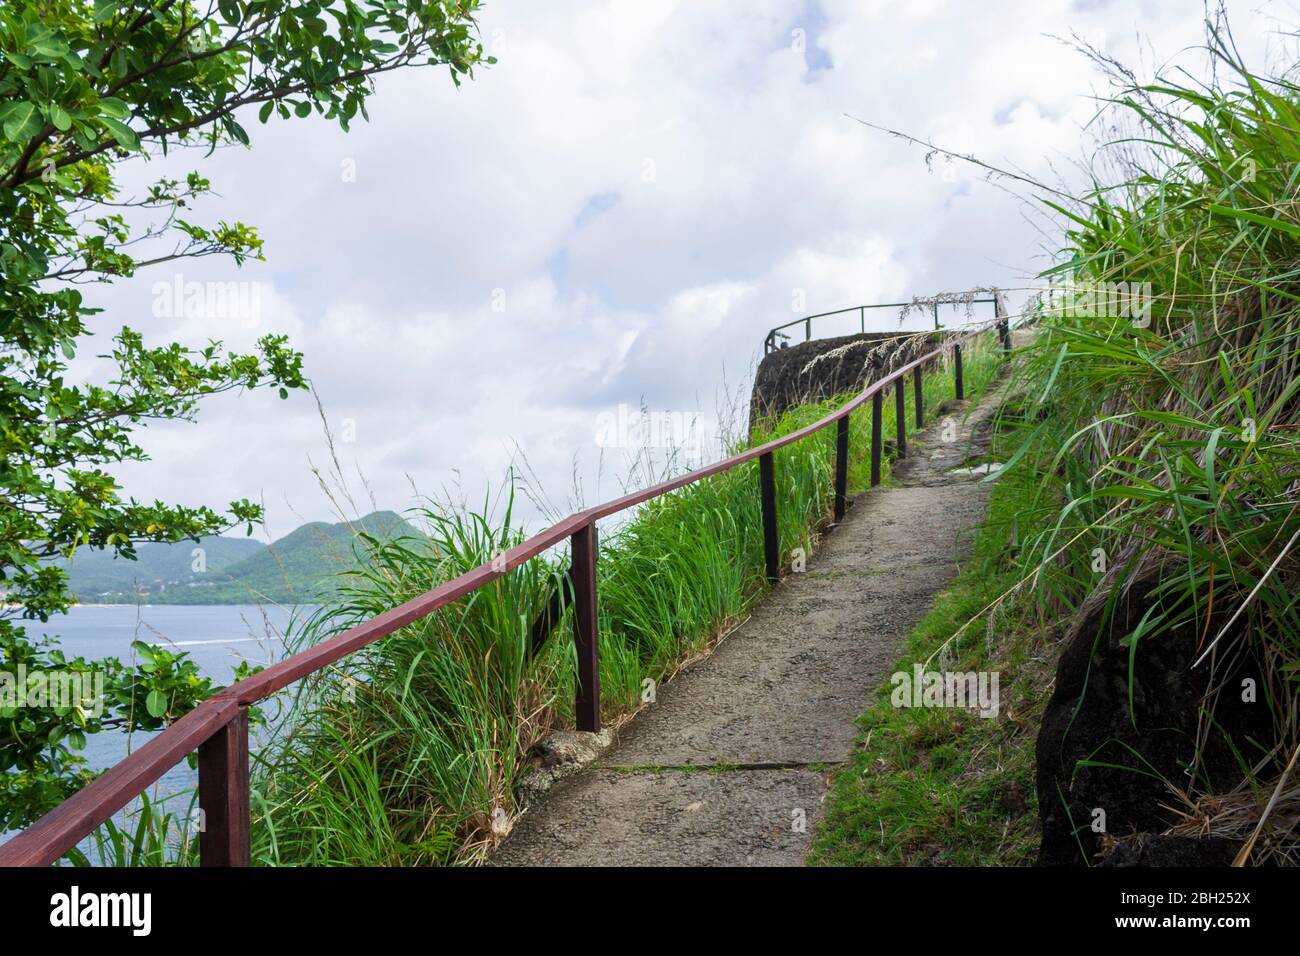 Breathtaking view of the concrete pathway with a wooden handrail with green grass and trees on either side leading up to the top of Fort Rodney Stock Photo